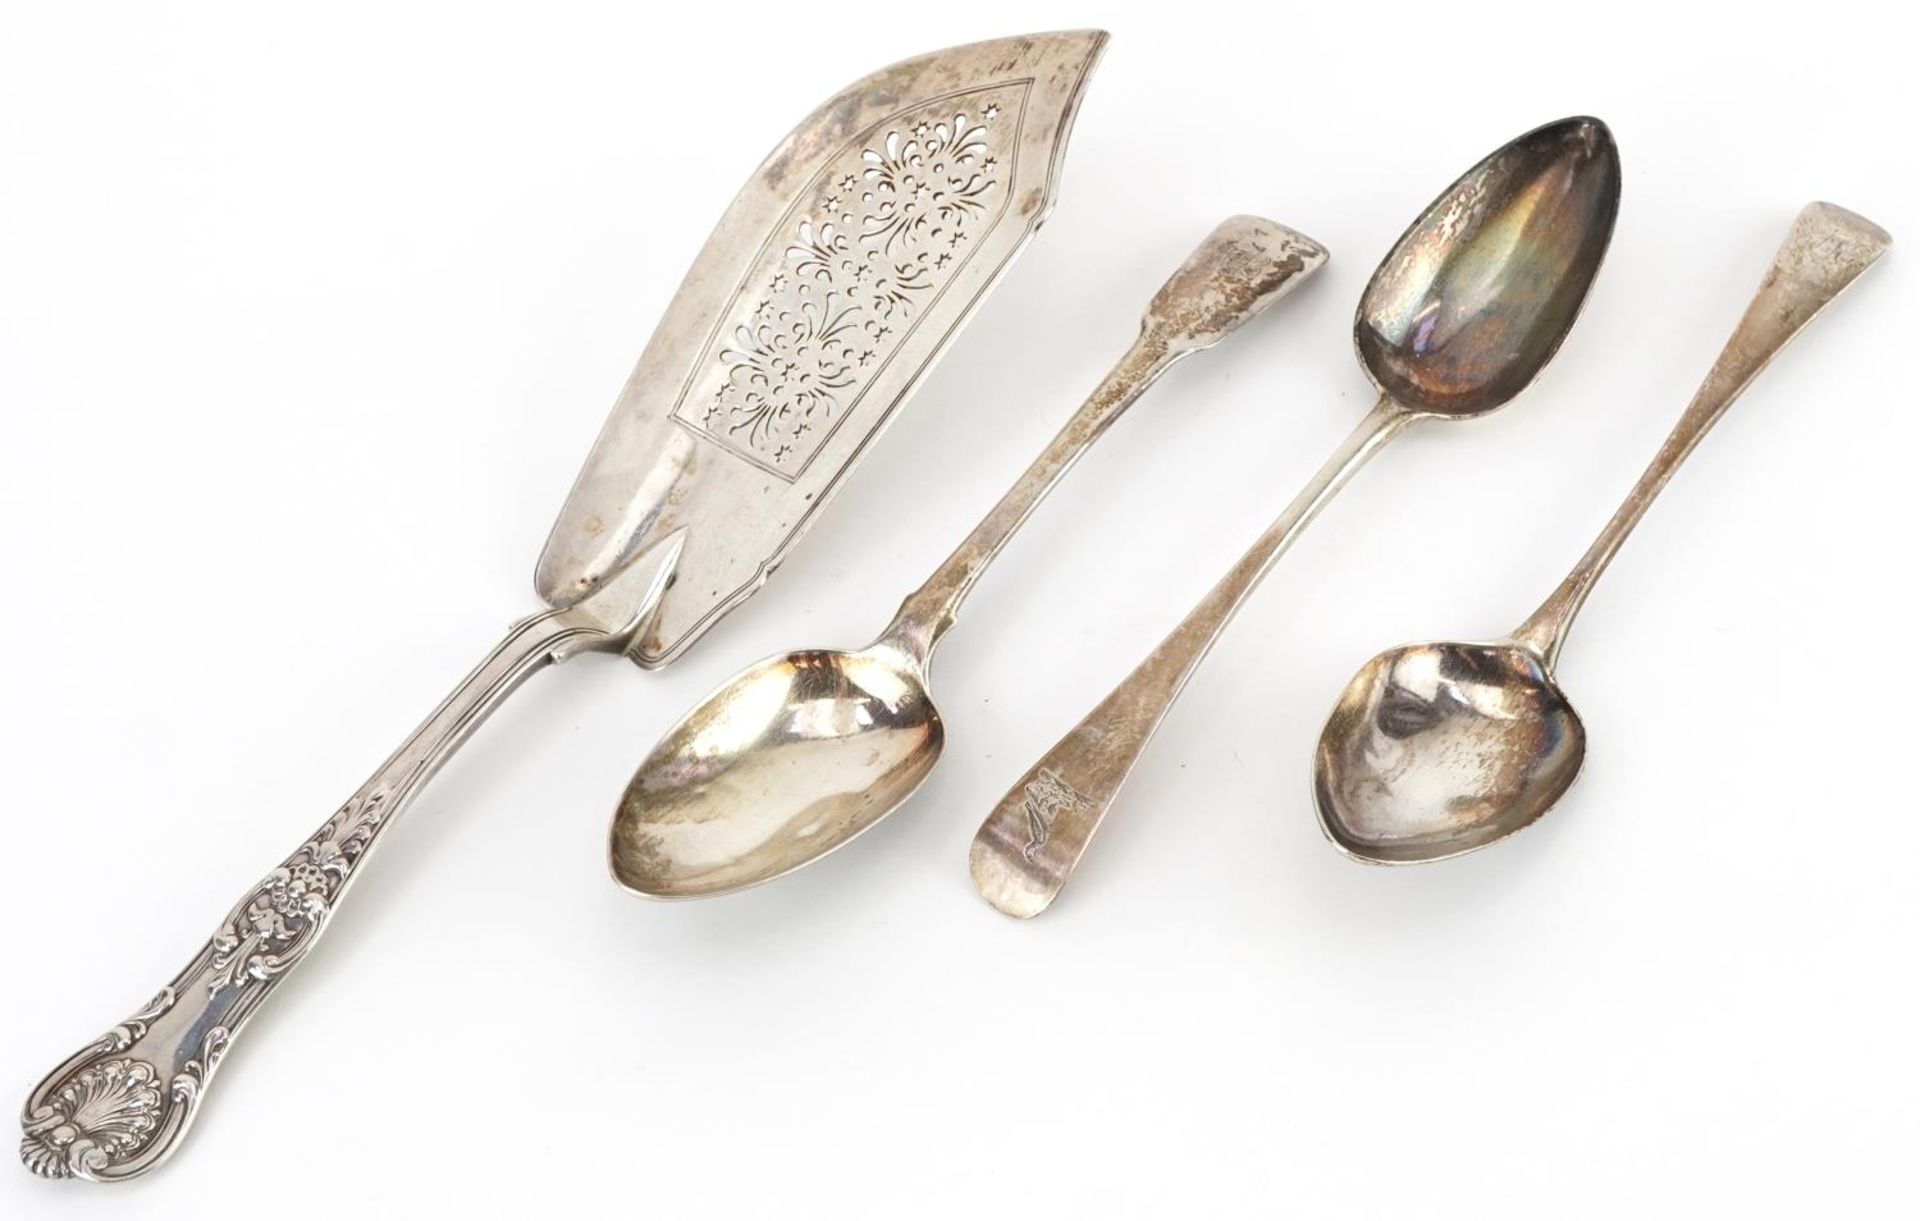 George IV and later silver comprising three Georgian tablespoons and a Victorian fish slice by